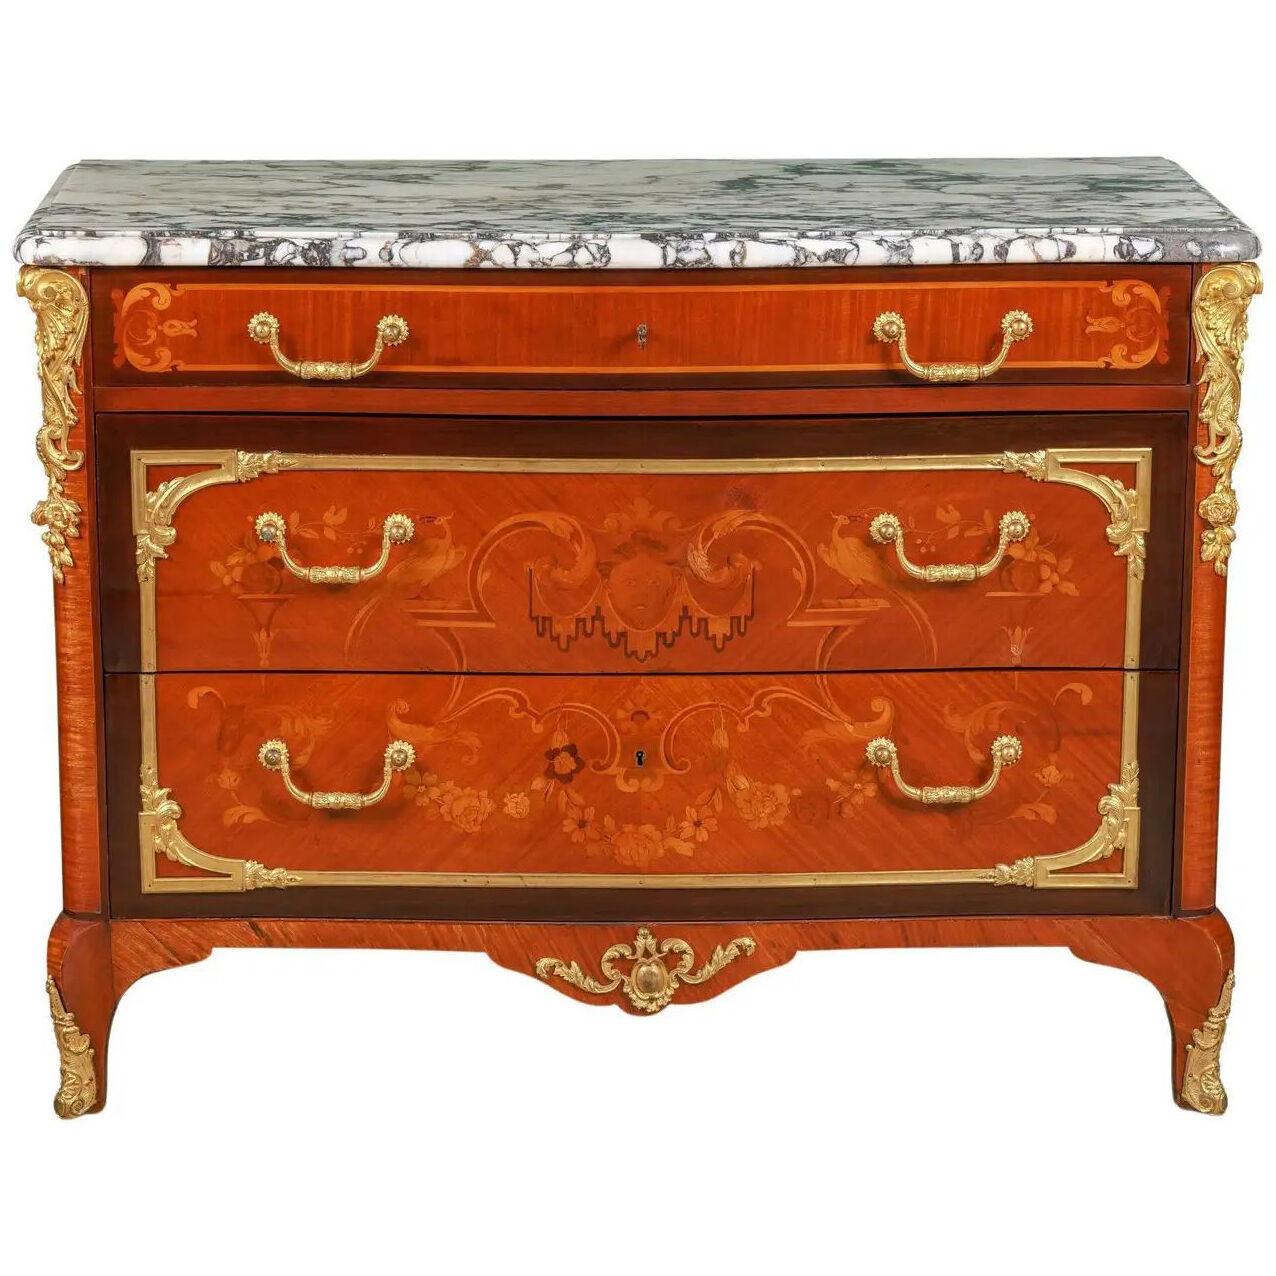 An Exquisite French Ormolu-Mounted Mahogany Parquetry Marble-Top Commode C. 1870